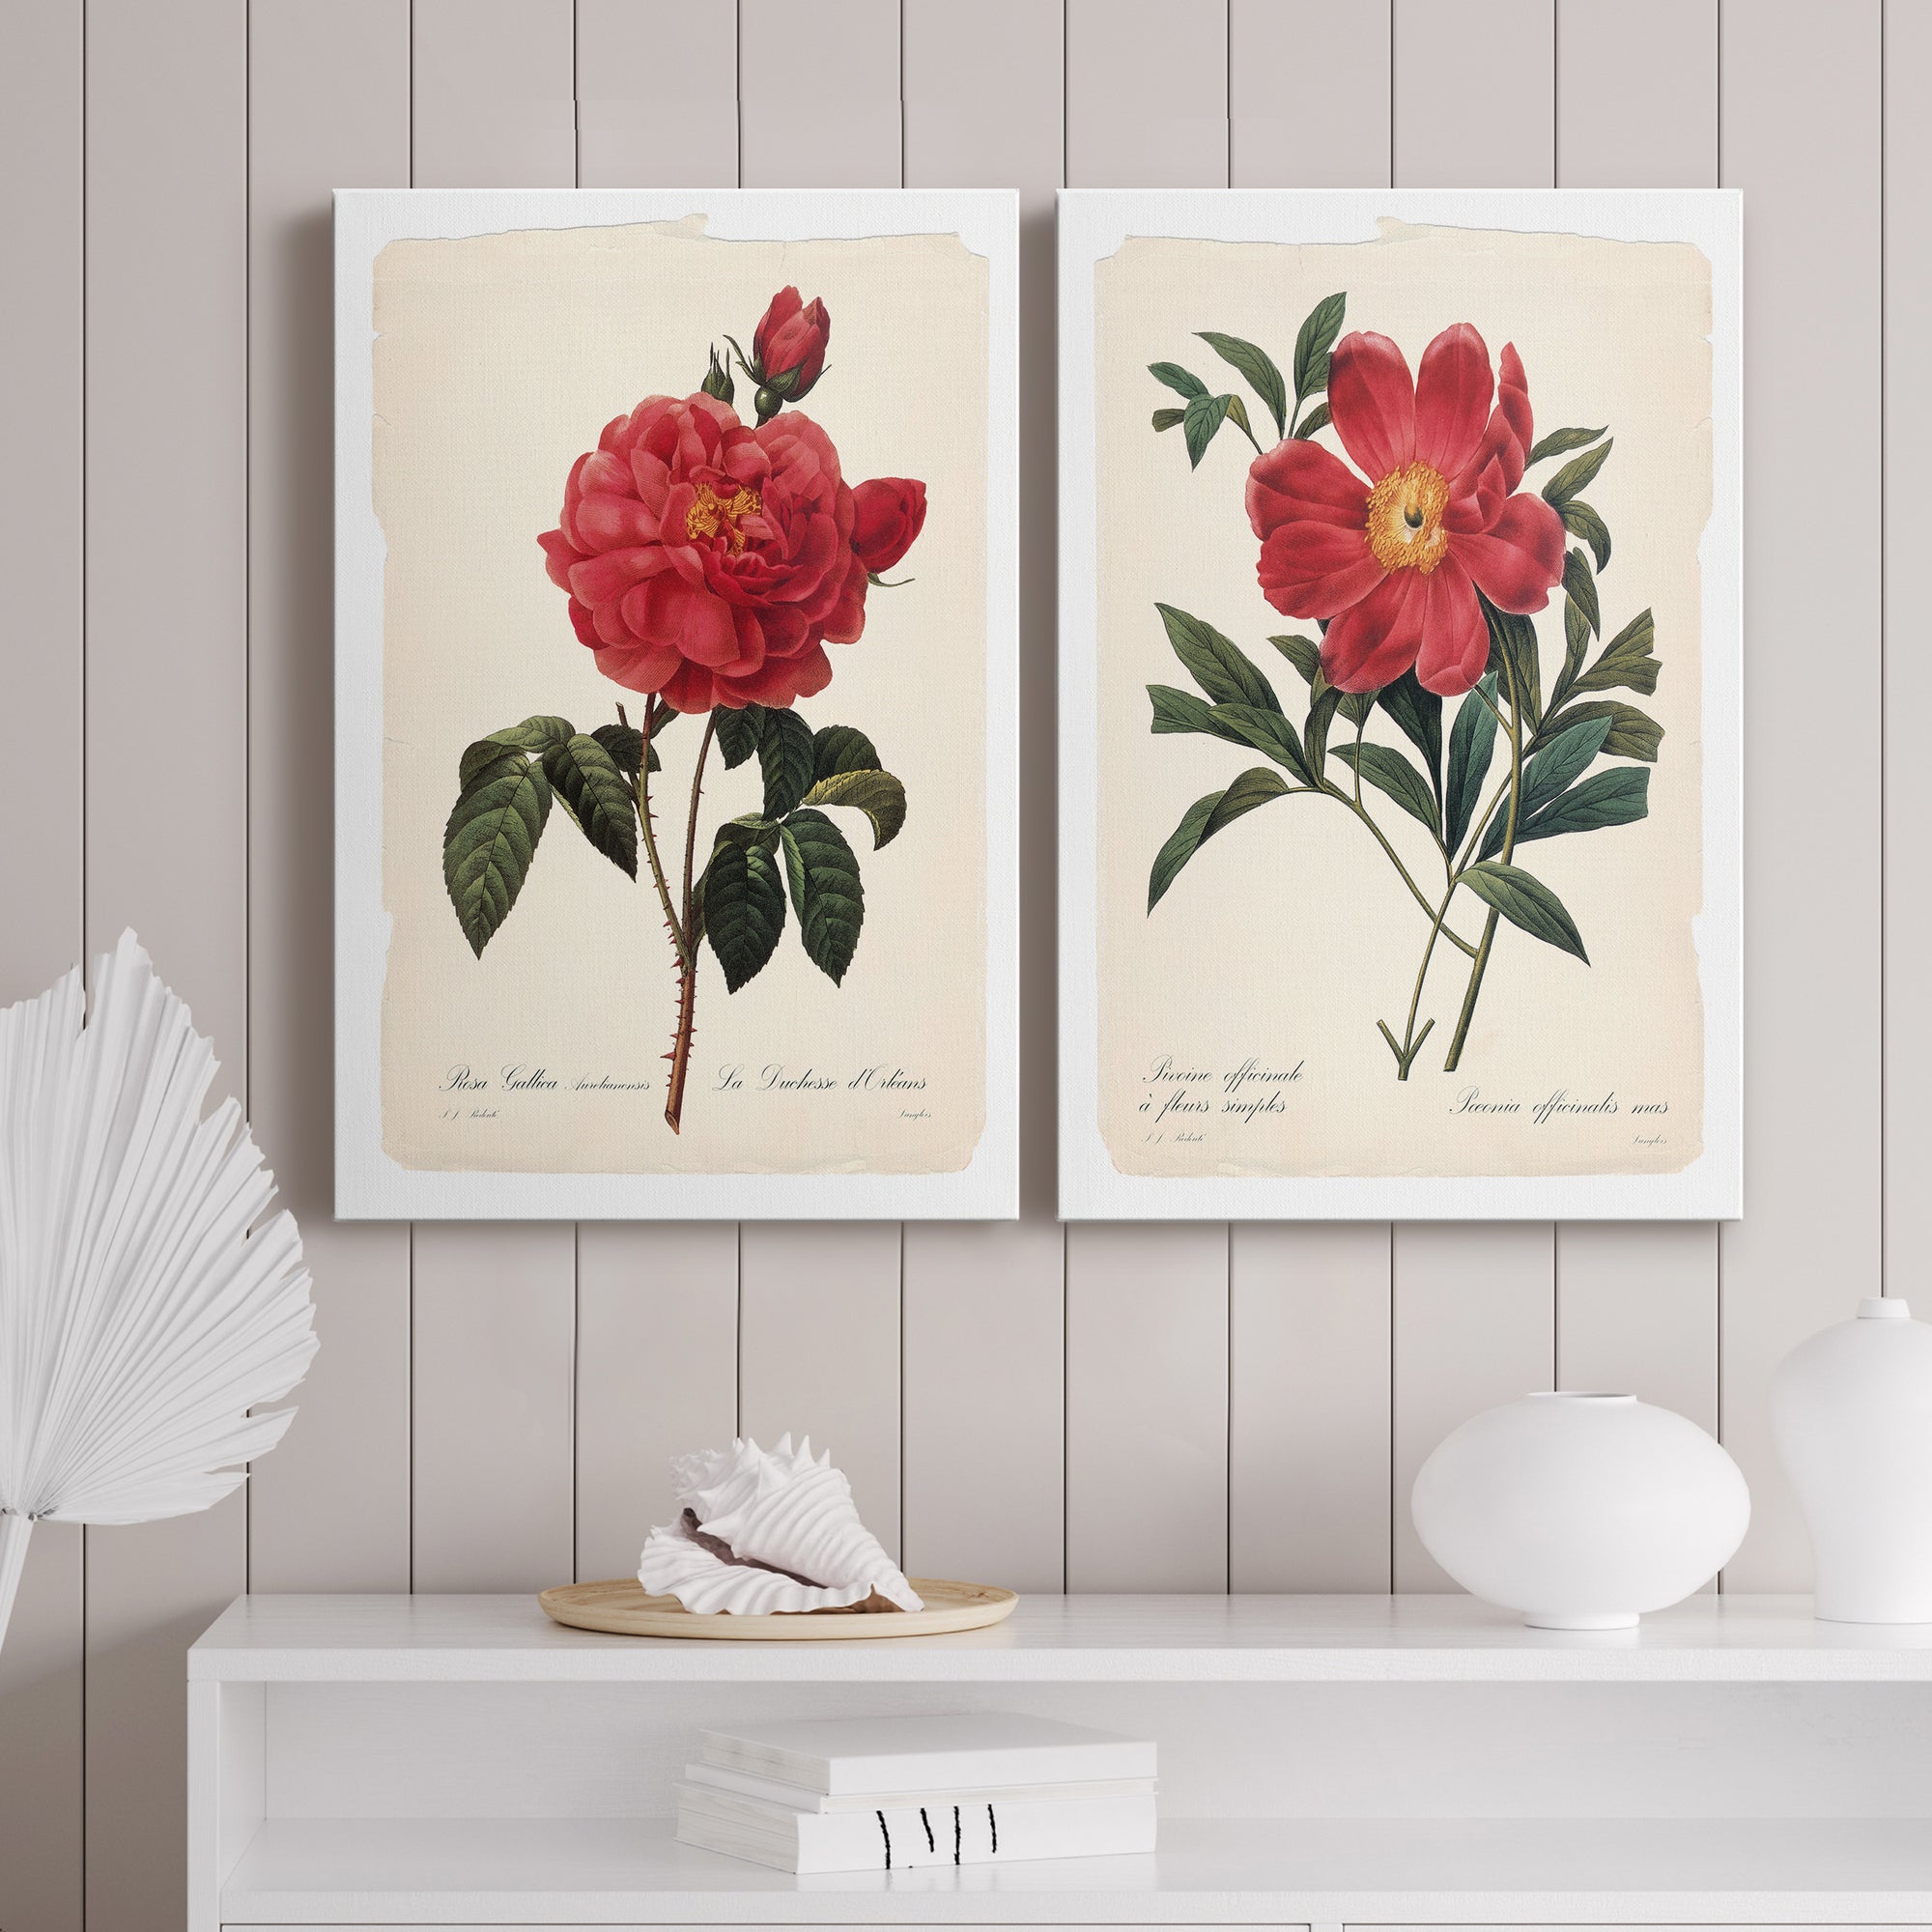 Red Botanical III Premium Gallery Wrapped Canvas - Ready to Hang - Set of 2 - 8 x 12 Each